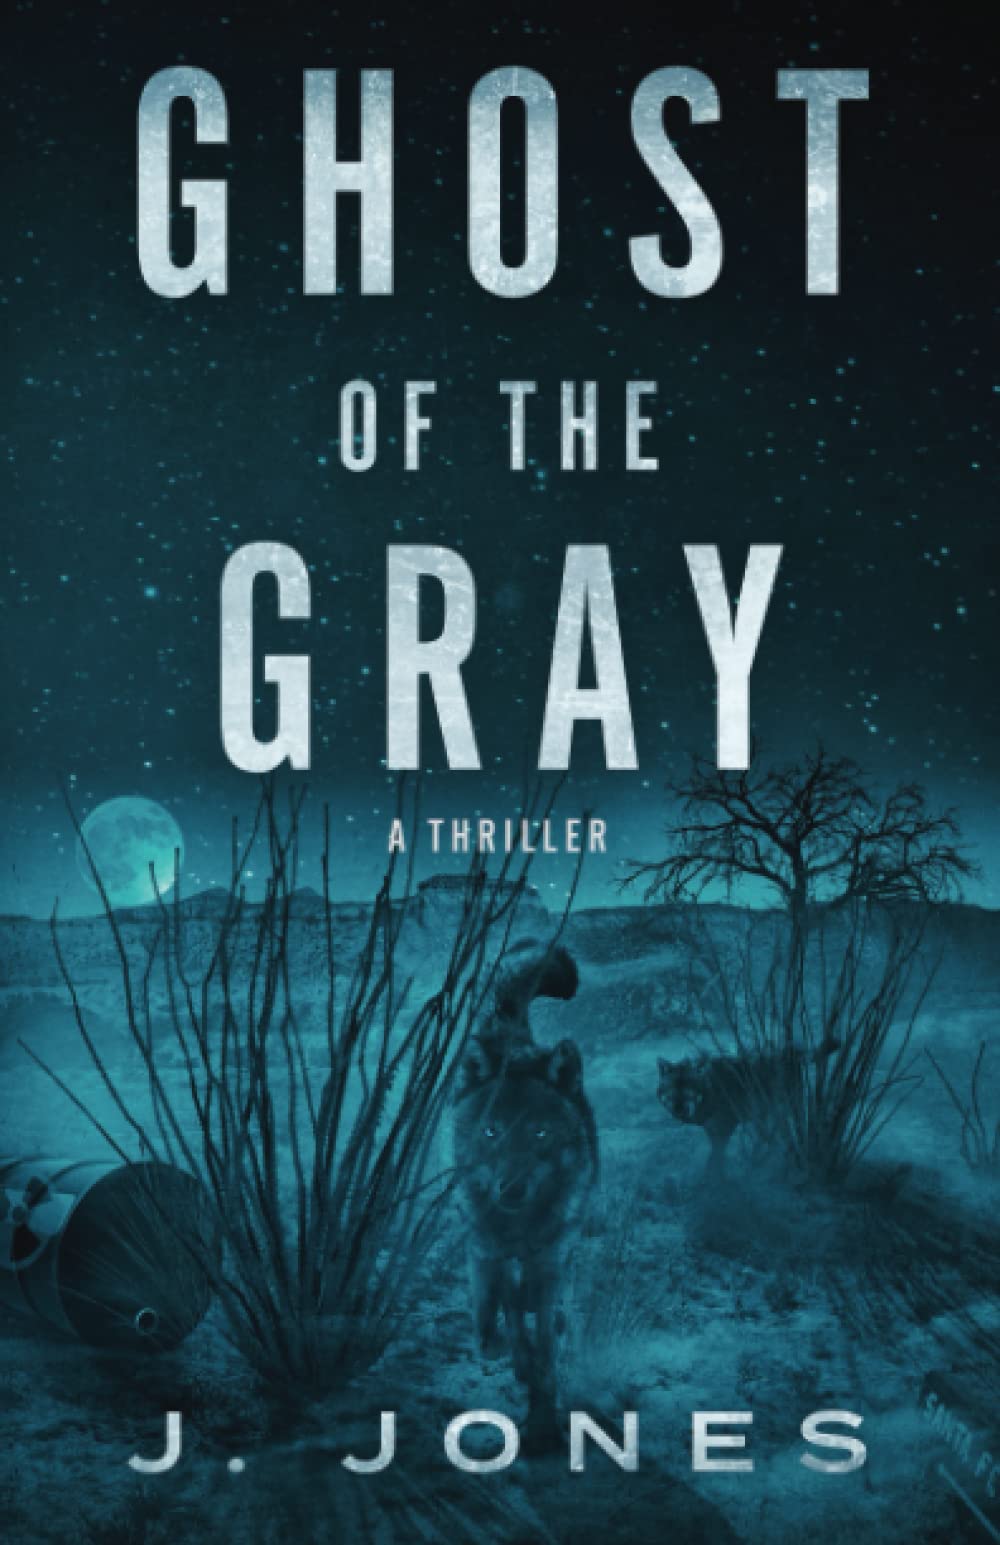 Ghost of the Gray by J. Jones